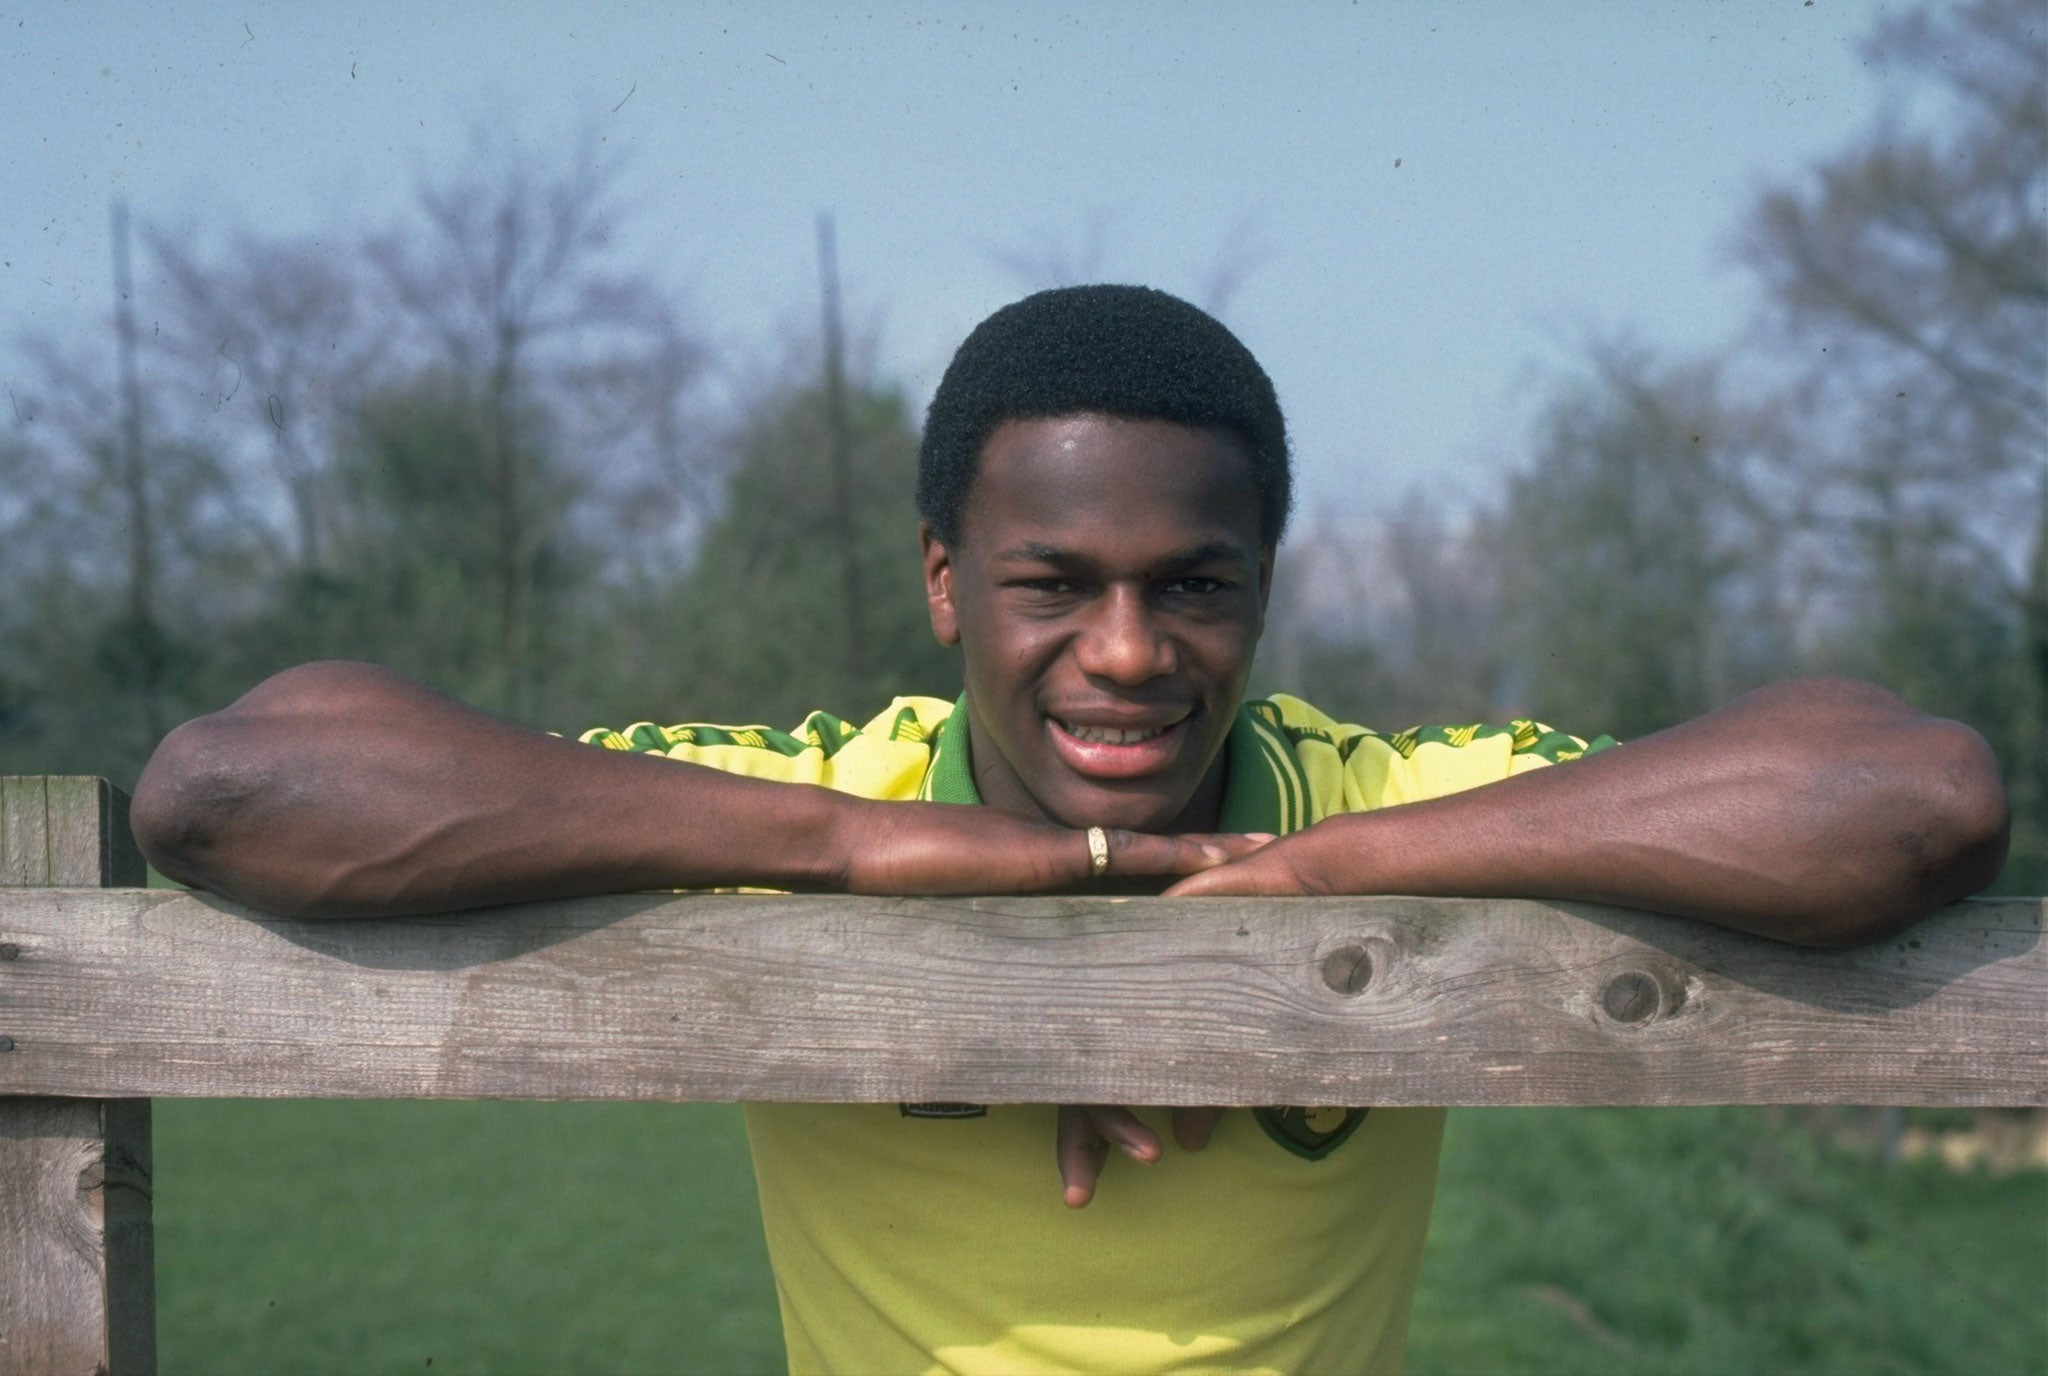 &#13;
Fashanu committed suicide in 1993 &#13;